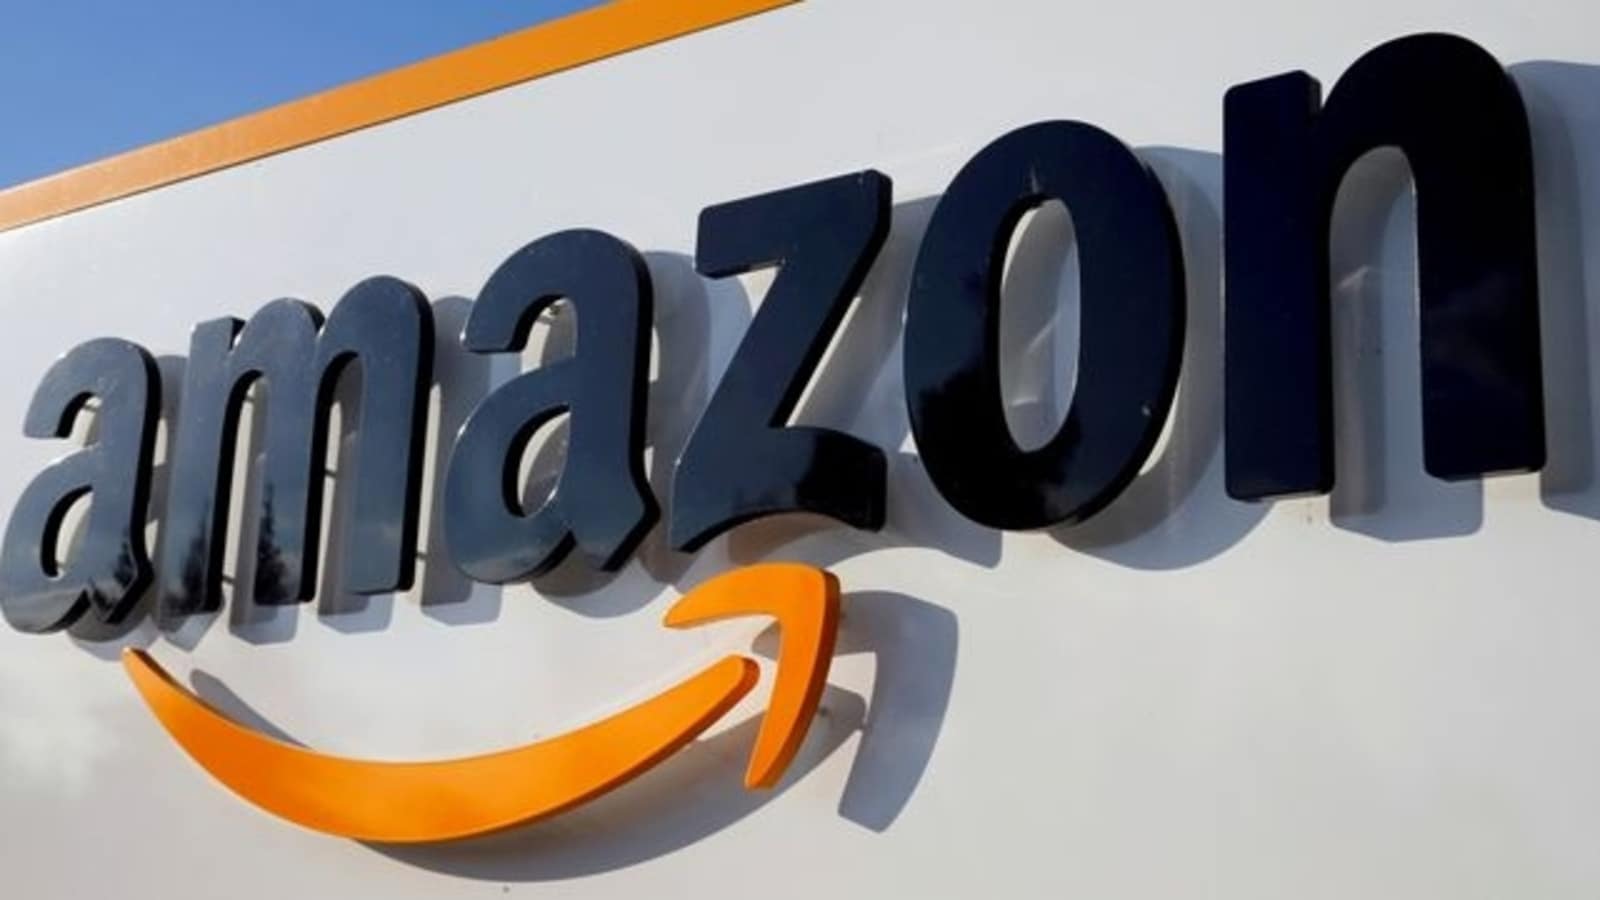 Amazon slams Reliance takeover of Future stores as ‘fraud’ in newspaper ads